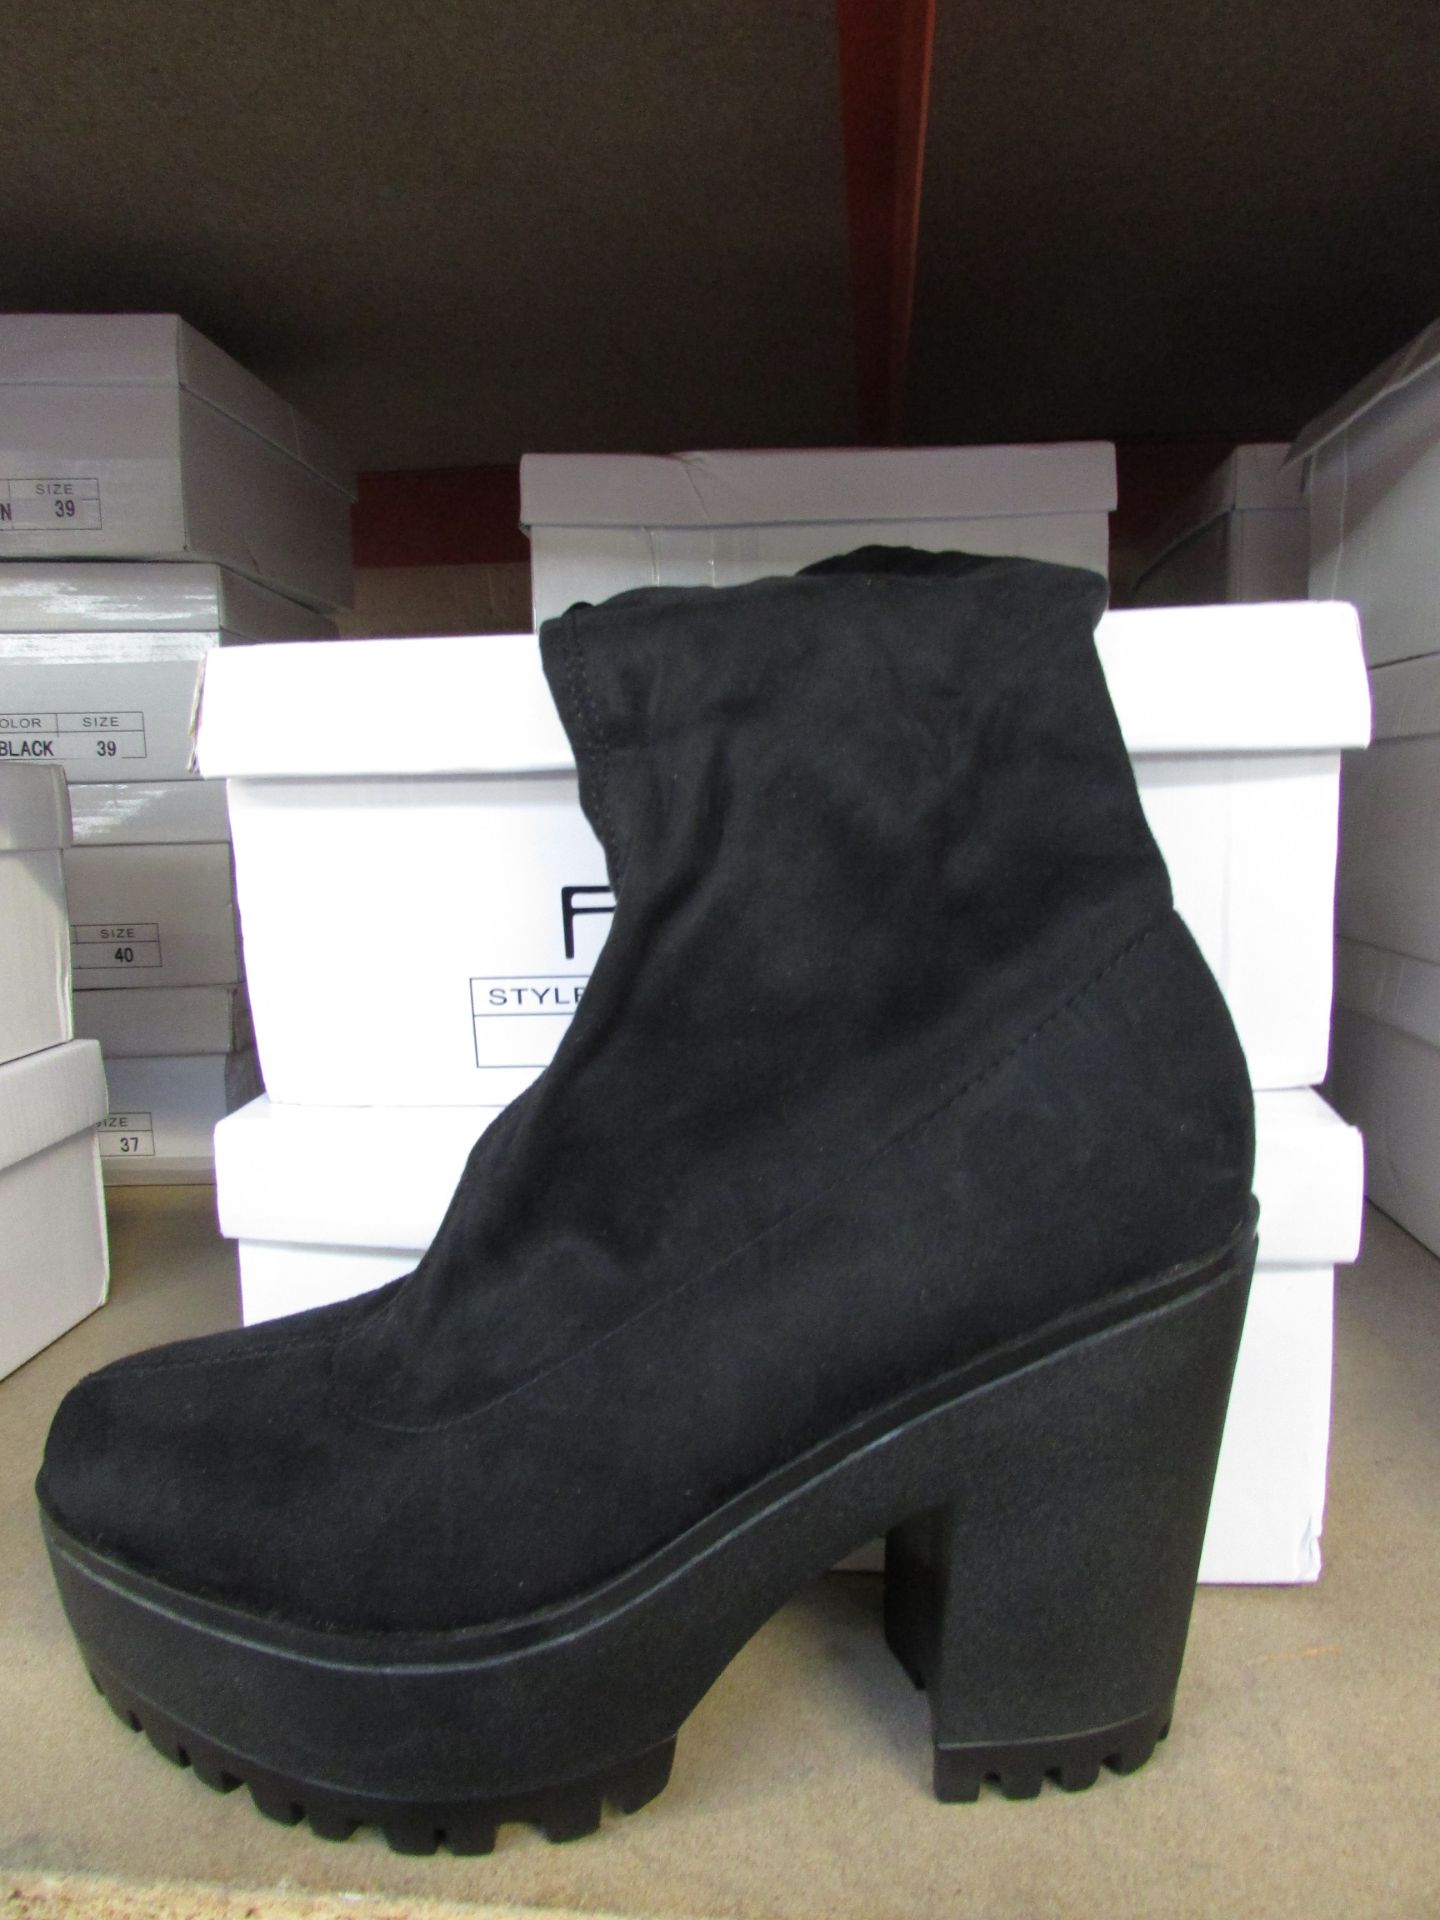 5X FUSION BLACK STRETCH SUEDE BOOTS UK SIZES 4,5,6